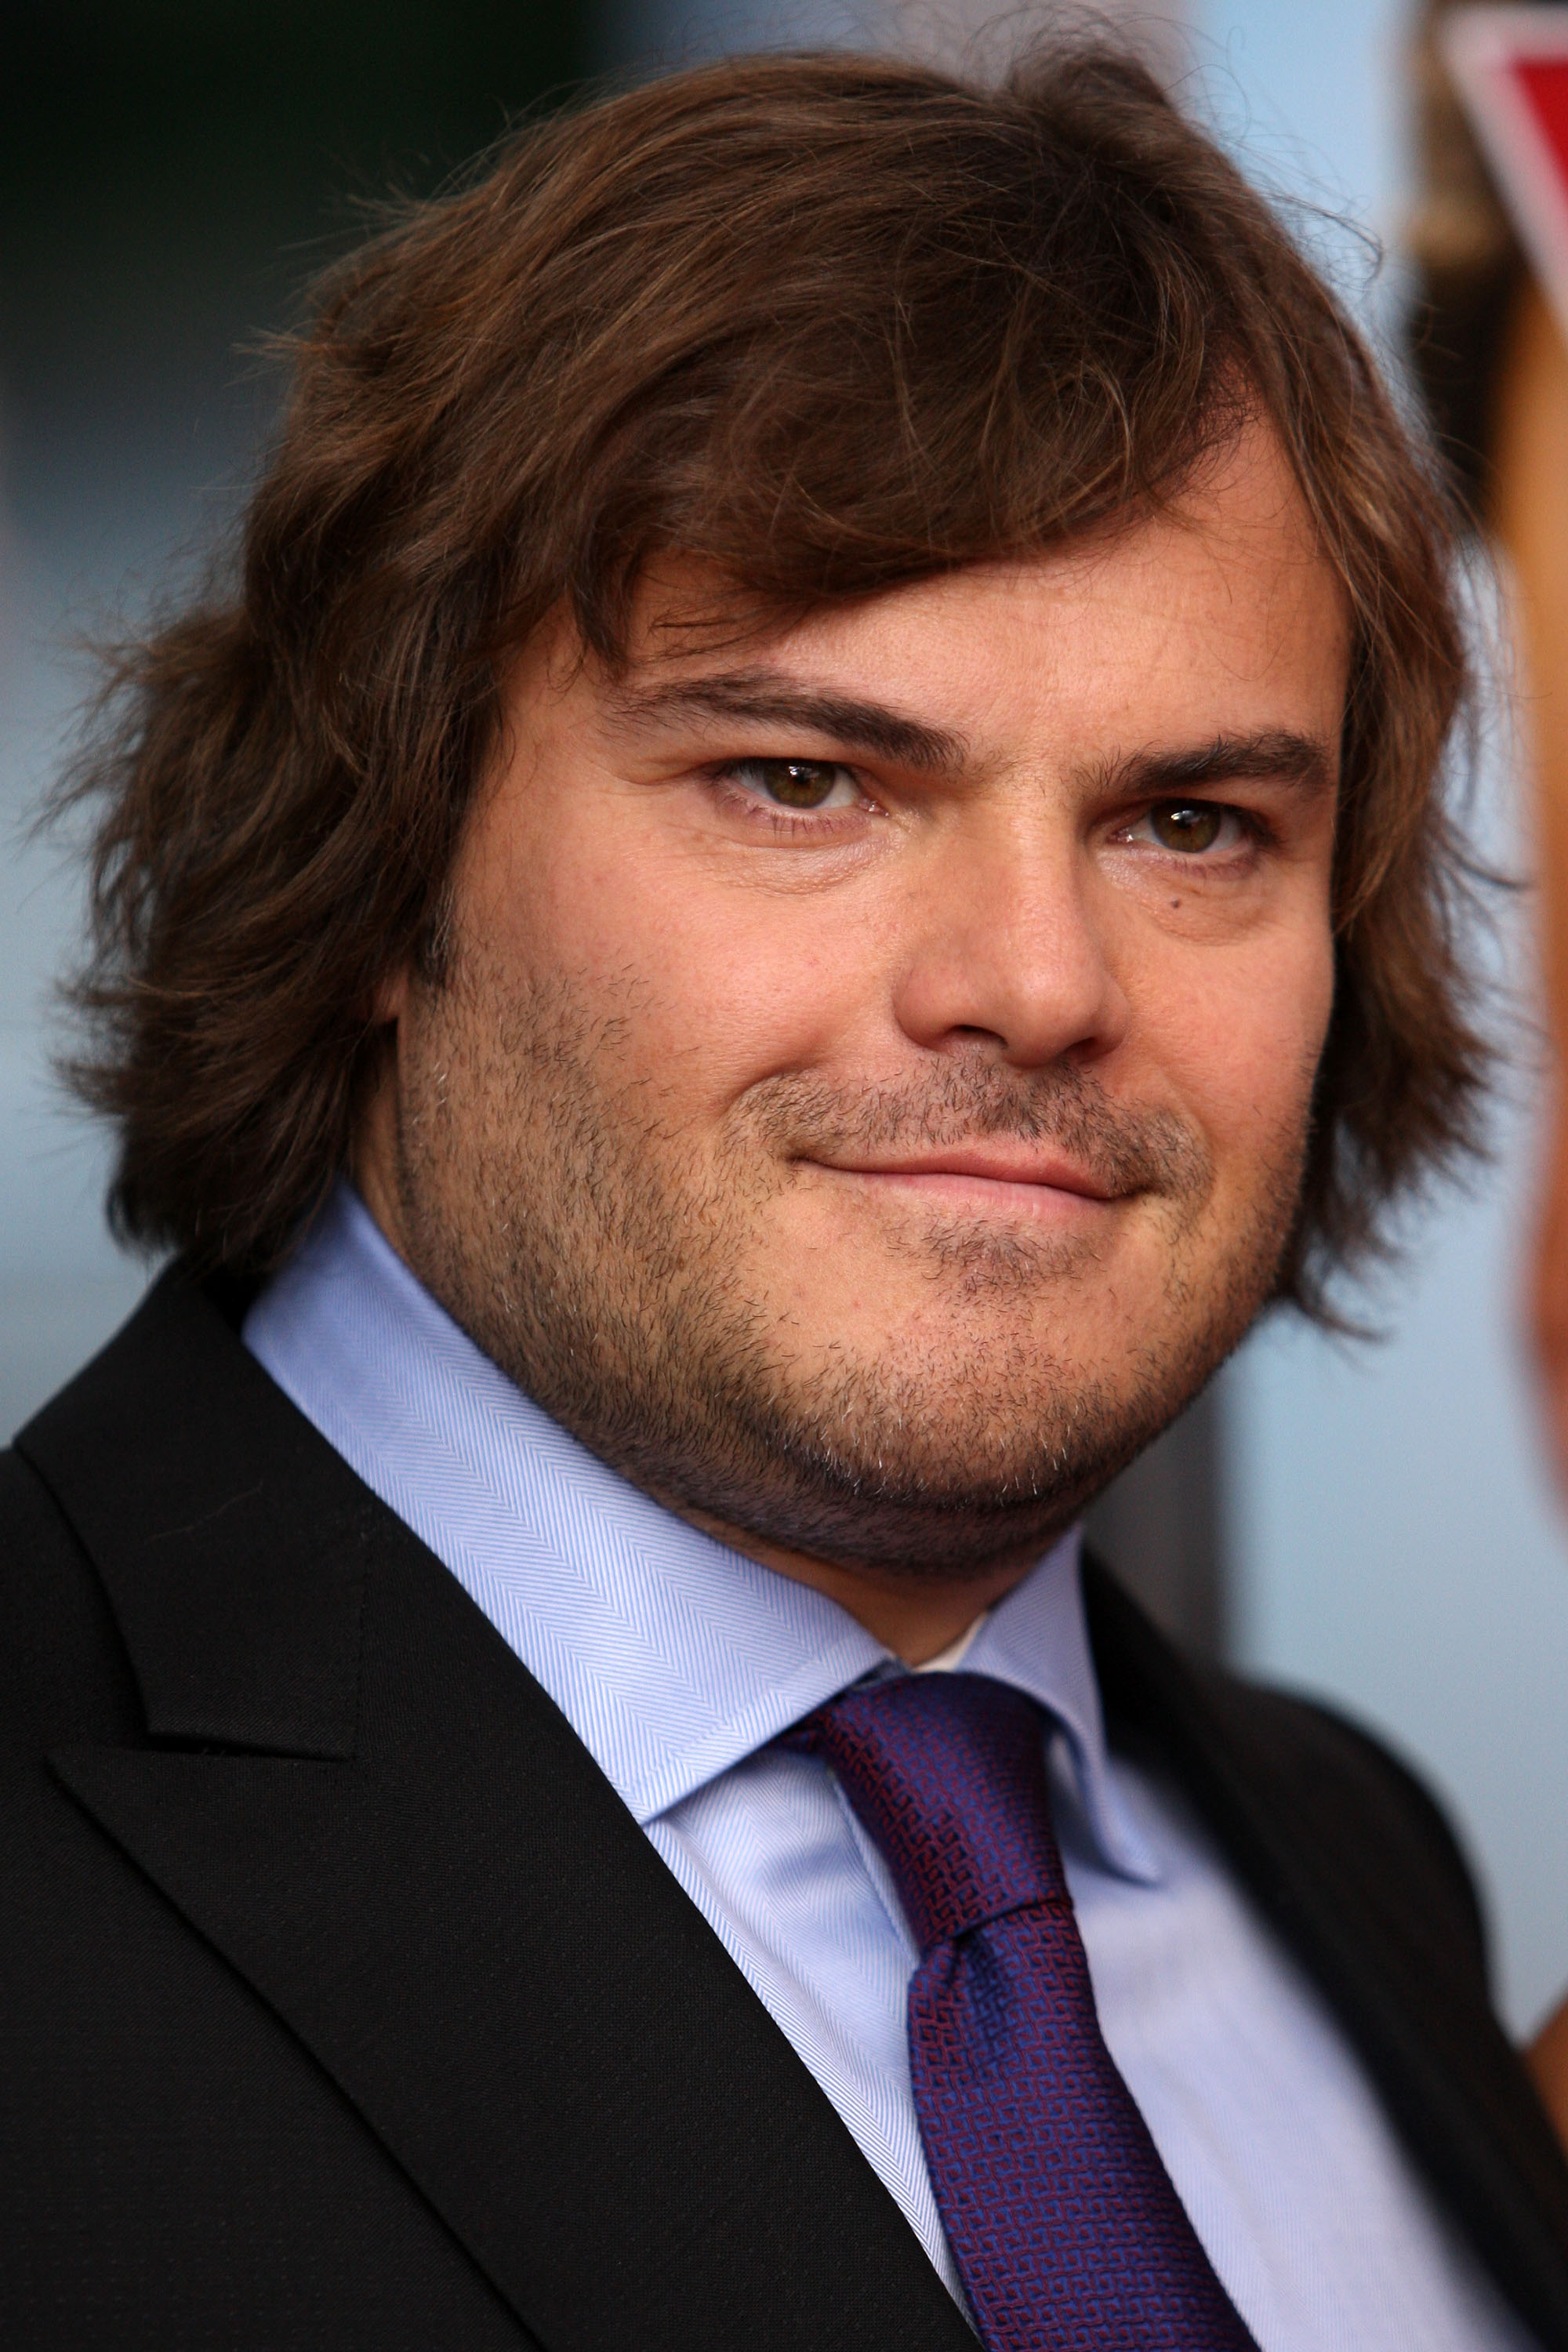 https://static.wikia.nocookie.net/music/images/4/4d/Jack_Black.jpg/revision/latest?cb=20180702021339